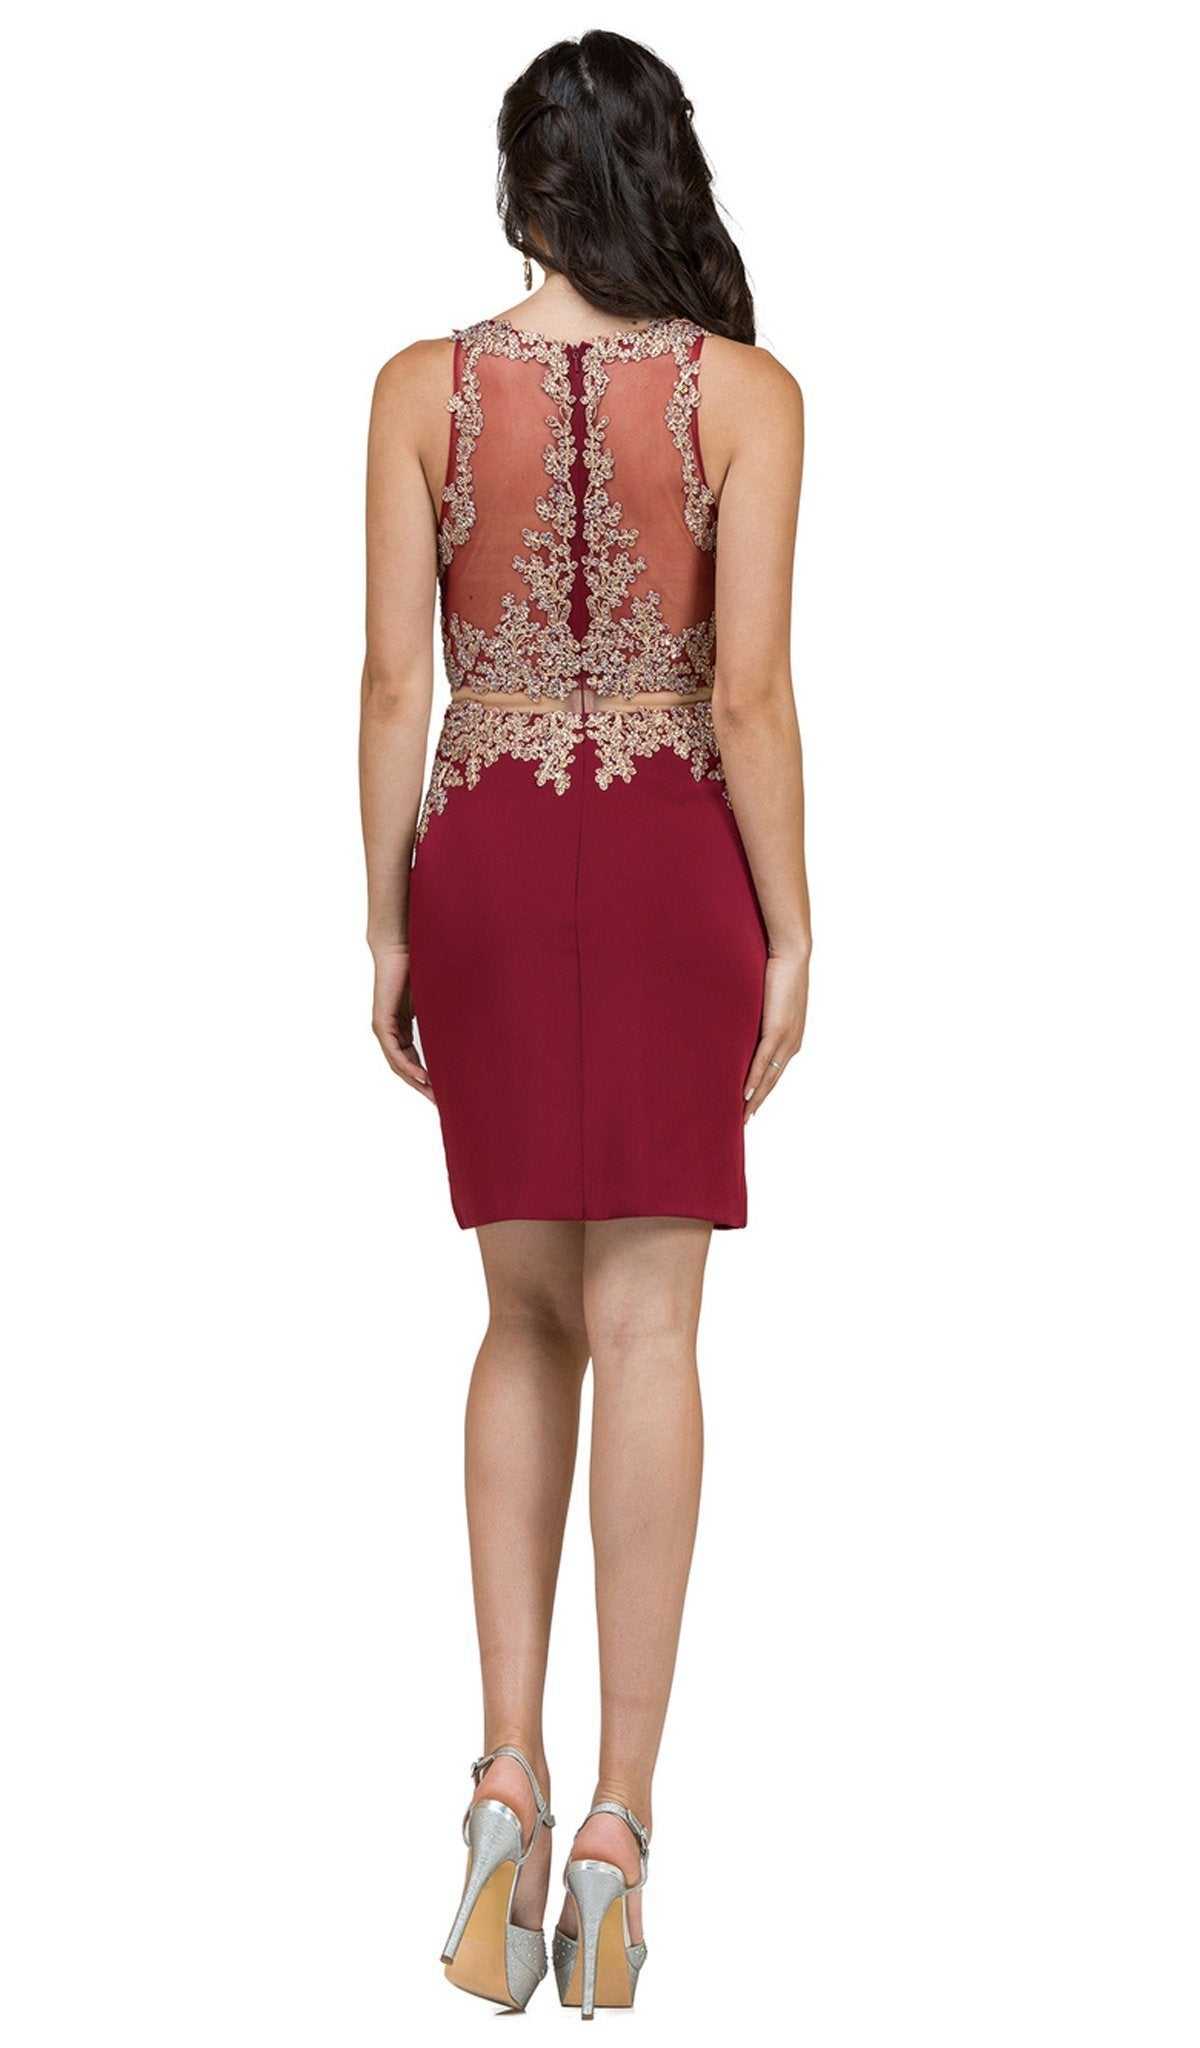 Dancing Queen, Dancing Queen - 2000 Mock Two-Piece Illusion Lace Cocktail Dress